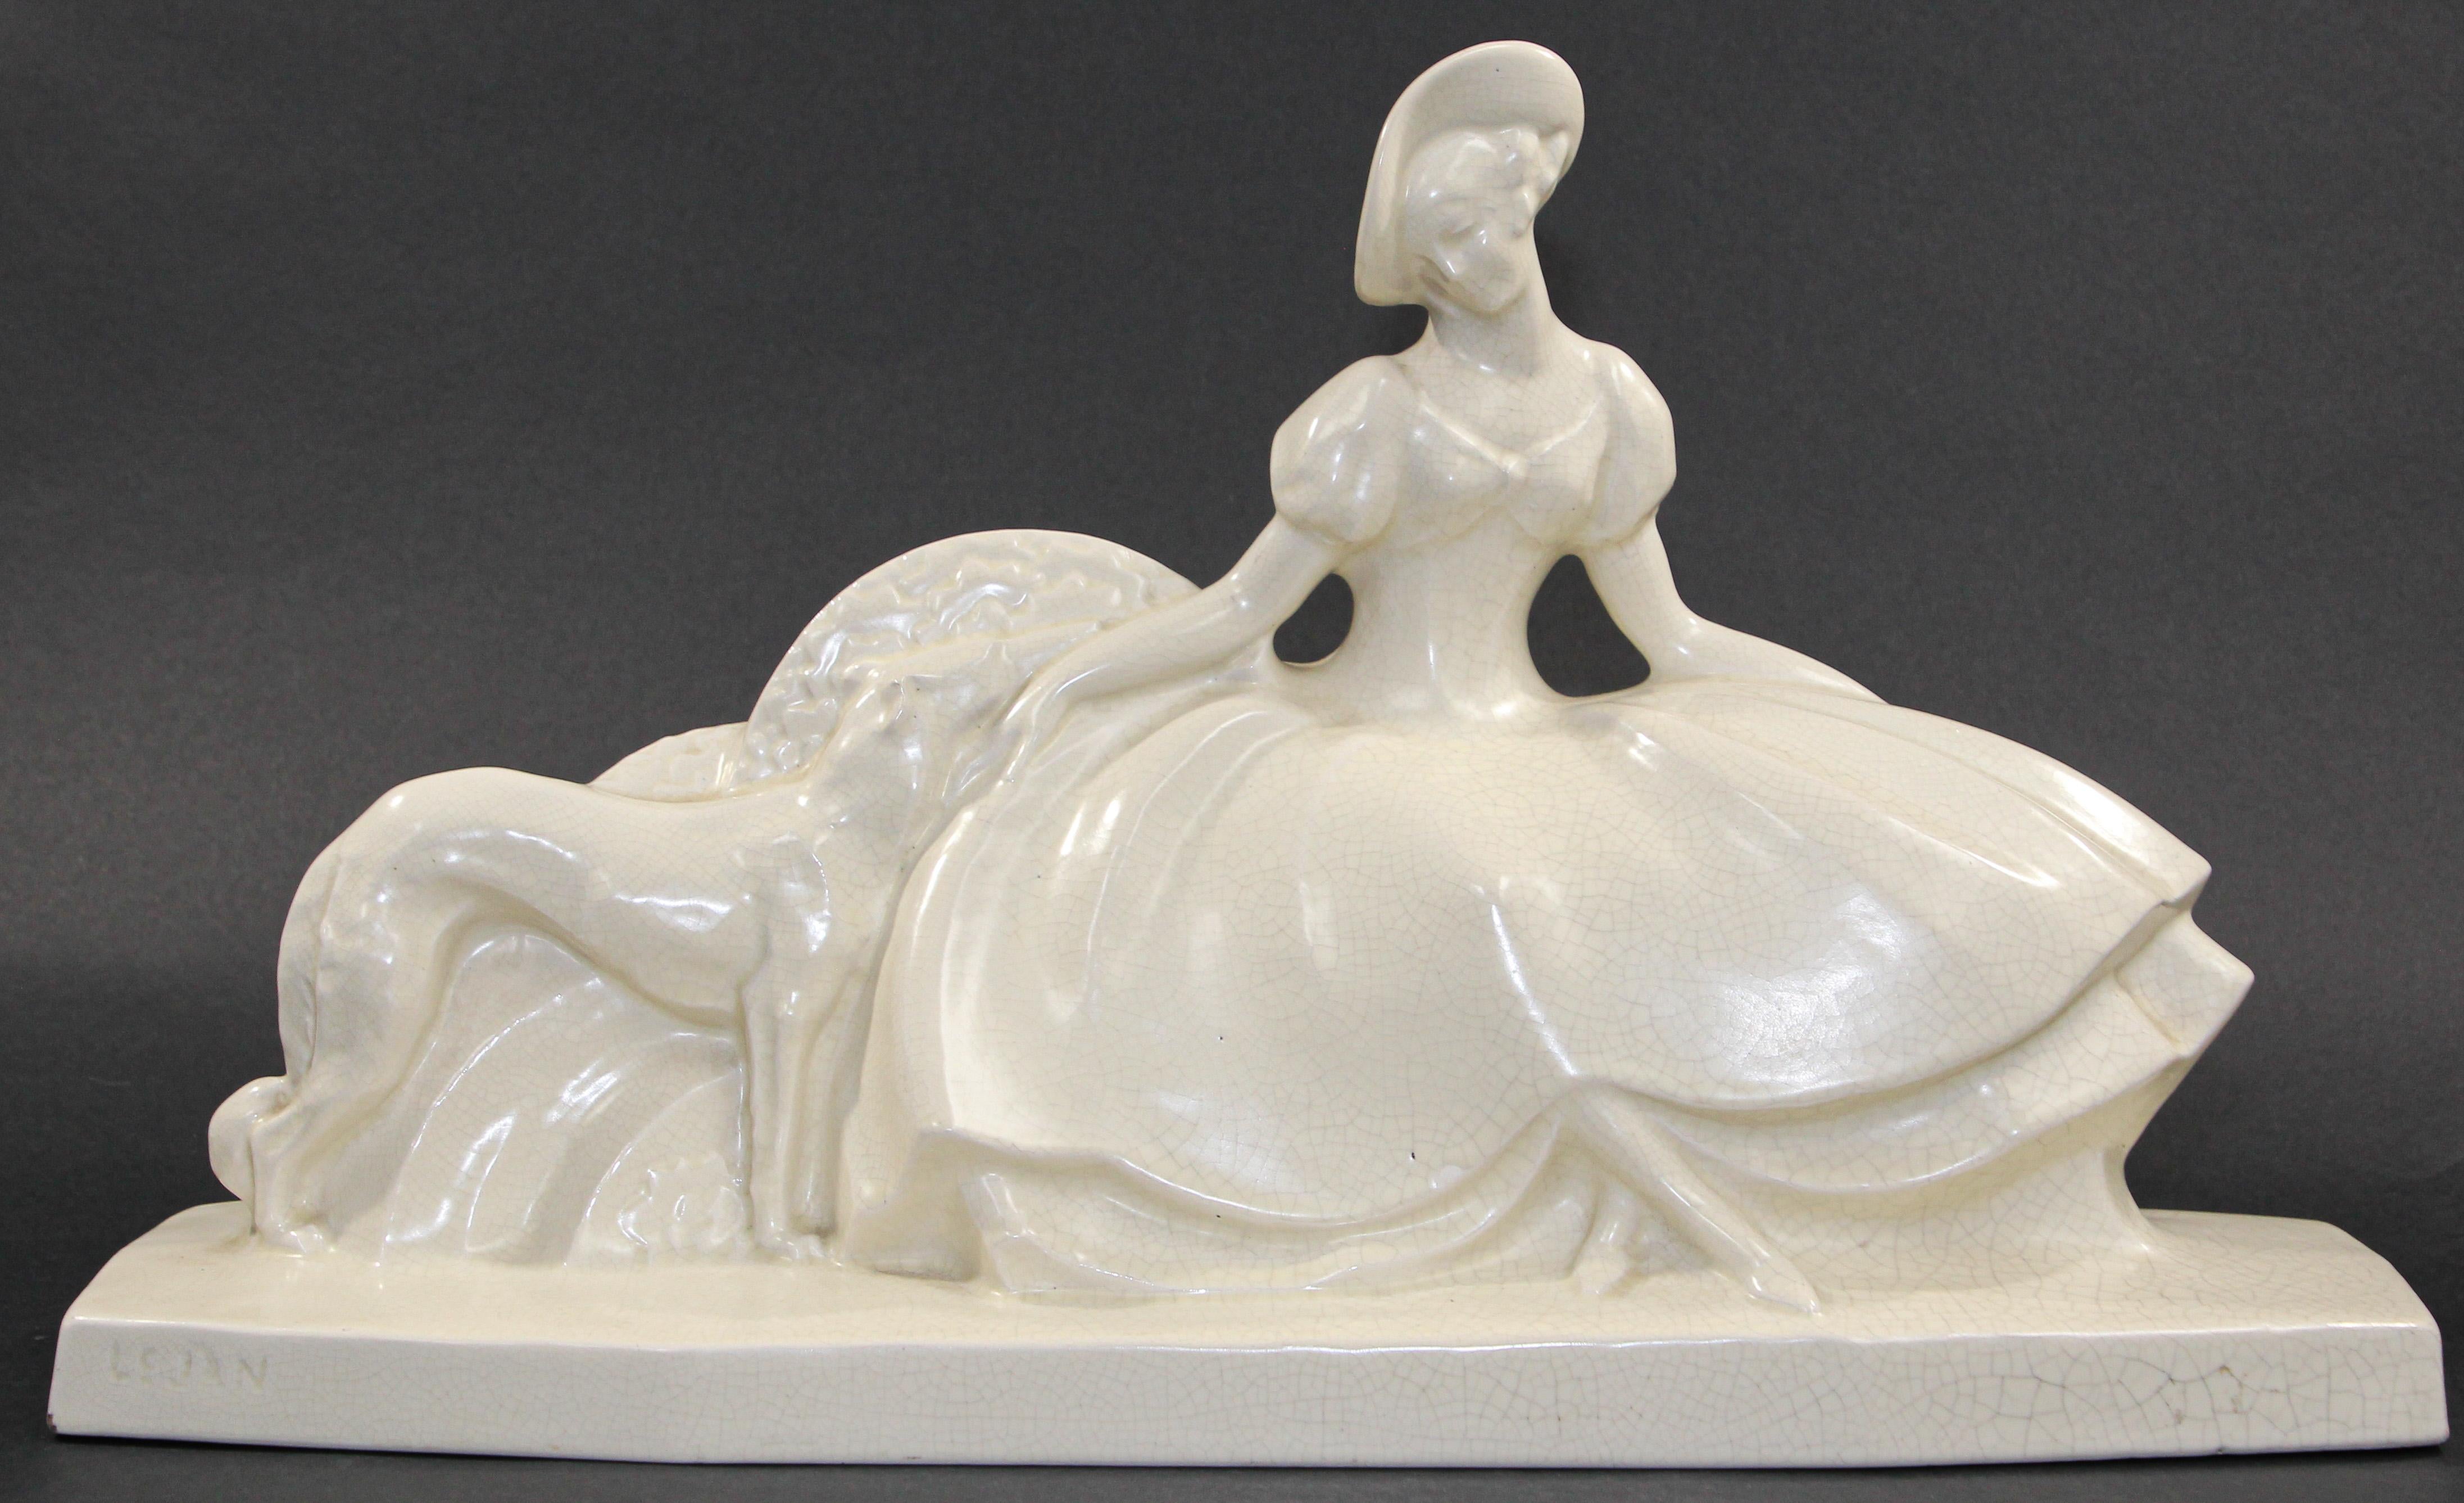 Art Deco Lejan French pottery craquelé glazed.
An Art Deco Lejan French pottery craquelé glazed figure group, lady wearing a crinoline dress accompanied by a greyhound, raised on a shaped octagonal base, impressed factory mark to edge of